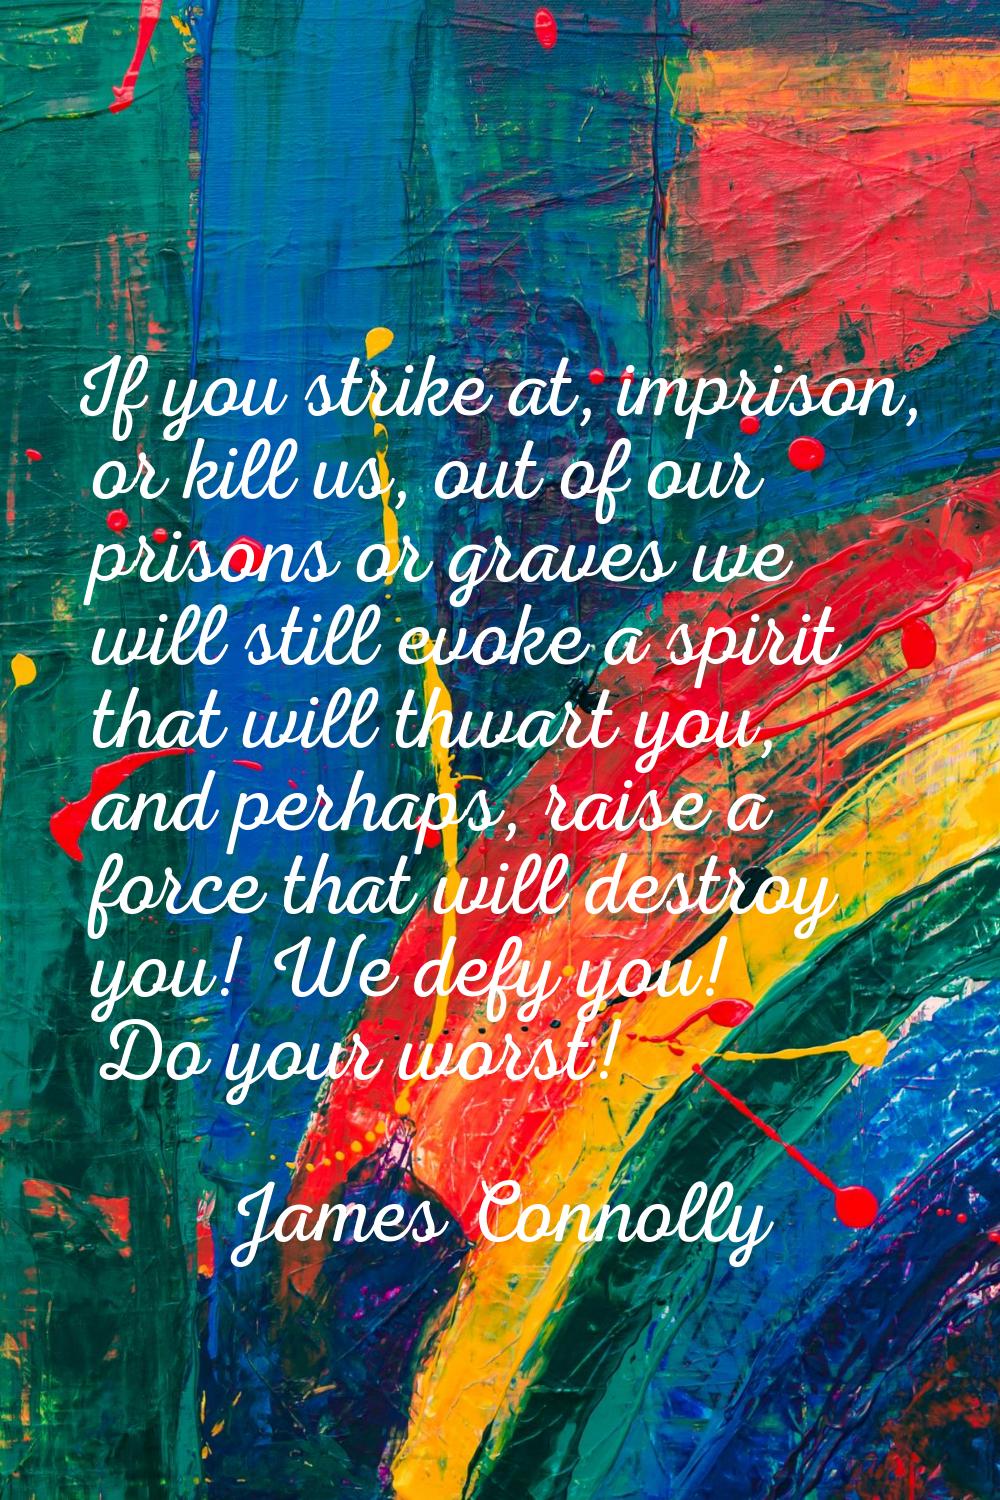 If you strike at, imprison, or kill us, out of our prisons or graves we will still evoke a spirit t